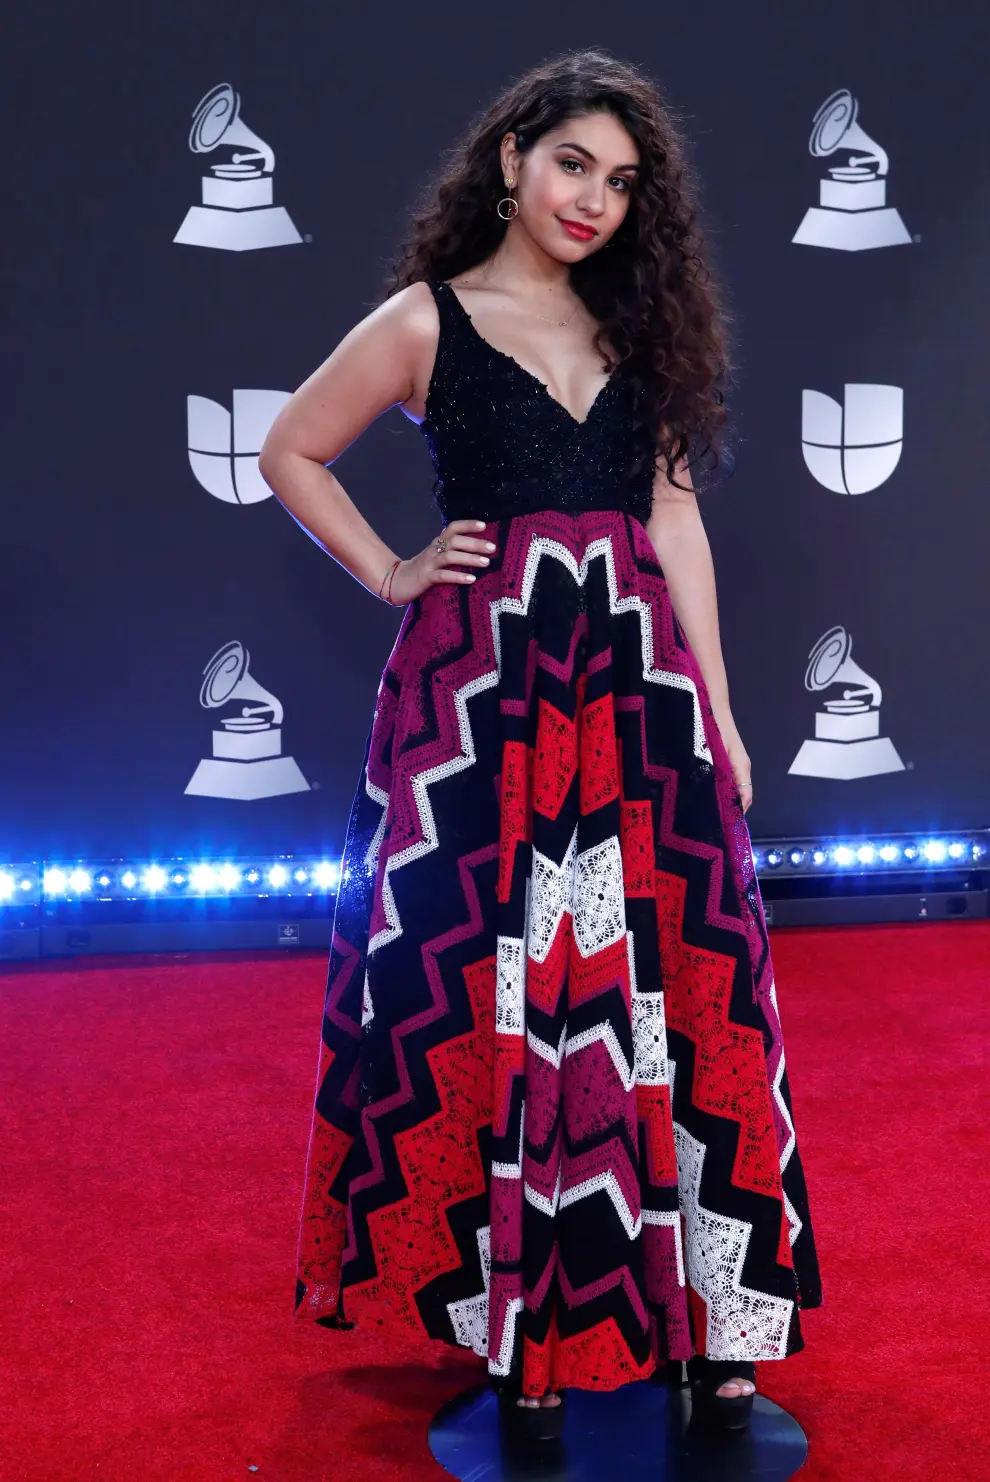 Las Vegas (United States), 15/11/2019.- Maity Interiano arrives for the 20th annual Latin Grammy Awards ceremony at the MGM Grand Garden Arena in Las Vegas, Nevada, USA, 14 November 2019. The Latin Grammys recognize artistic and/or technical achievement, not sales figures or chart positions, and the winners are determined by the votes of their peers - the qualified voting members of the Latin Recording Academy. (Estados Unidos) EFE/EPA/NINA PROMMER Arrivals - 20th Latin Grammy Awards